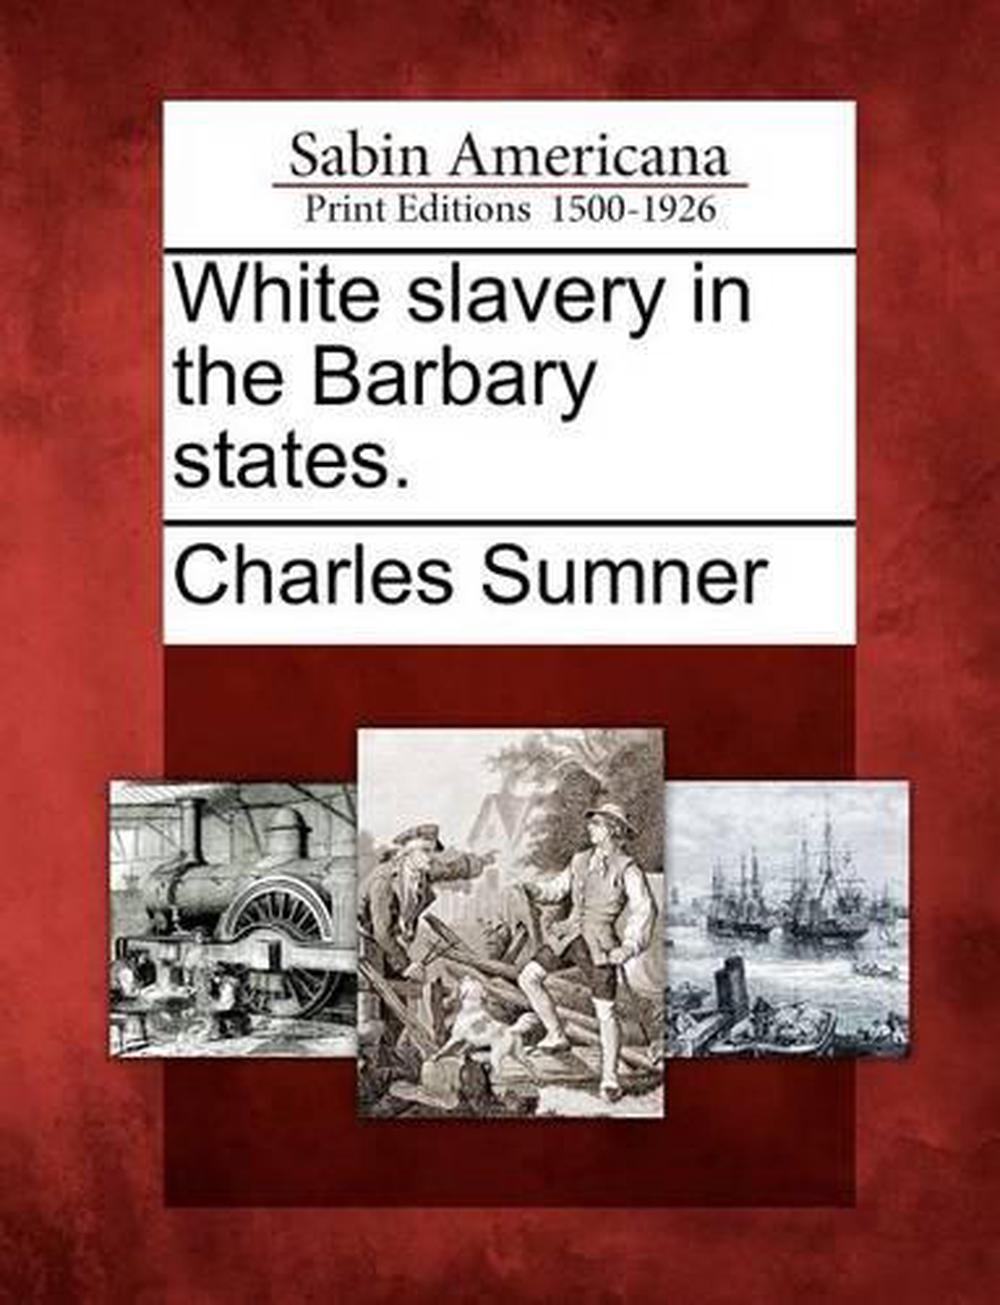 white slavery in the barbary states by charles sumner